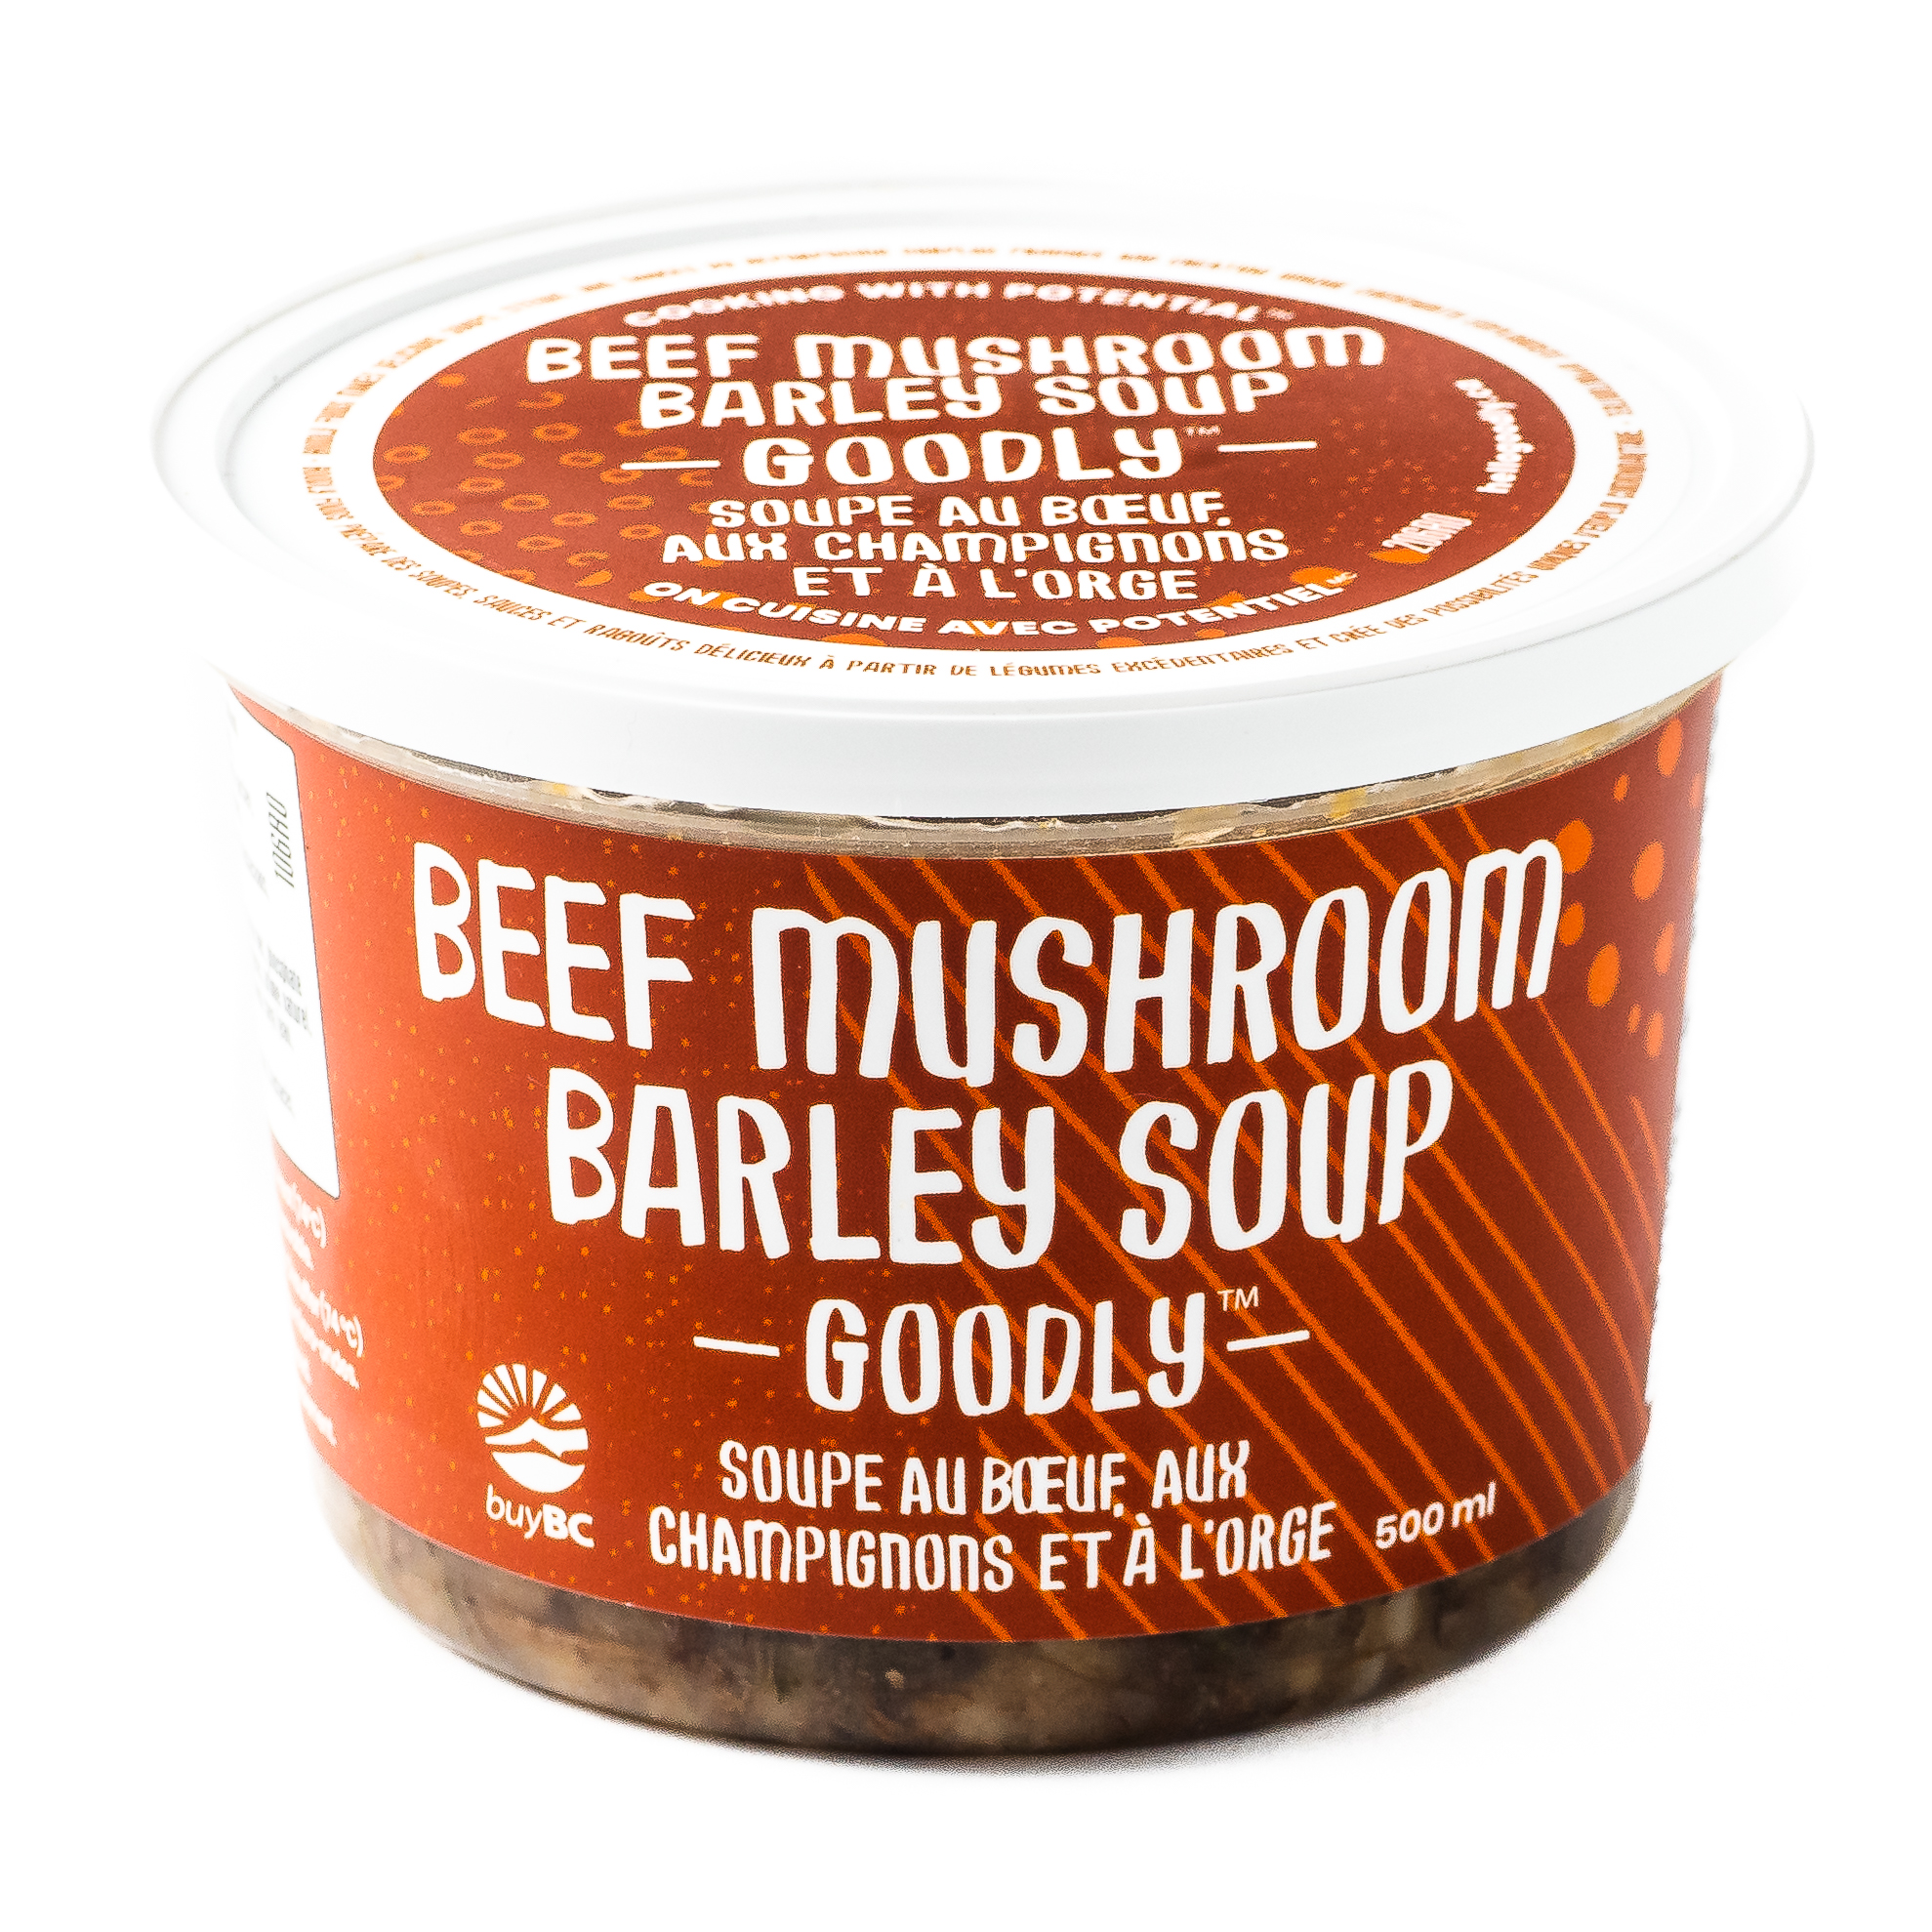 https://goodly.ca/wp-content/uploads/2020/12/Beef-Mushroom-Barley-Container-1.jpg